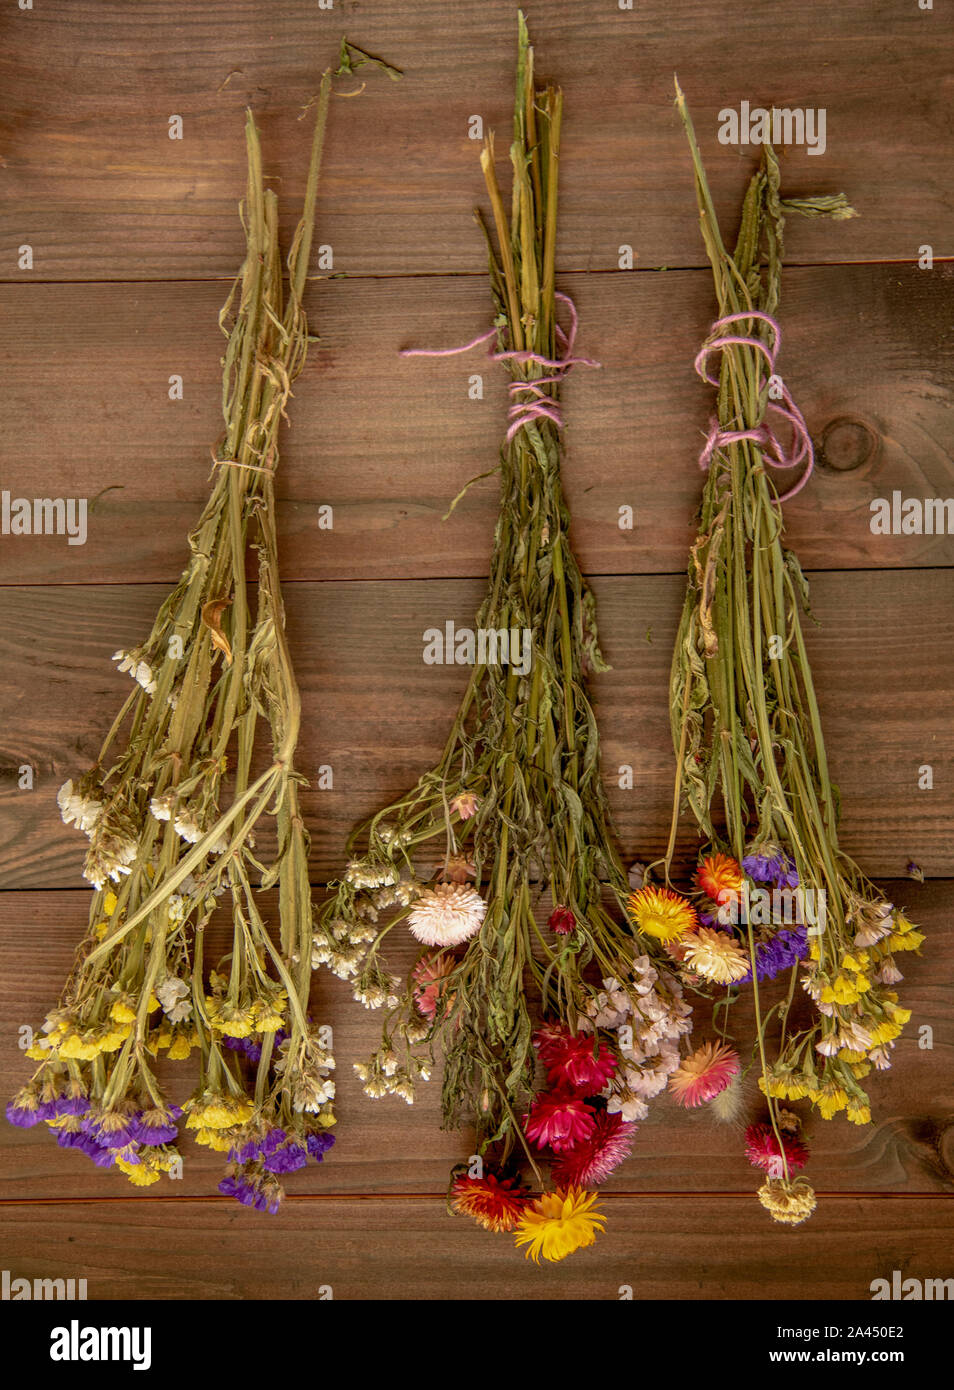 Three bouquets of dried flowers hang on the wall. Stock Photo